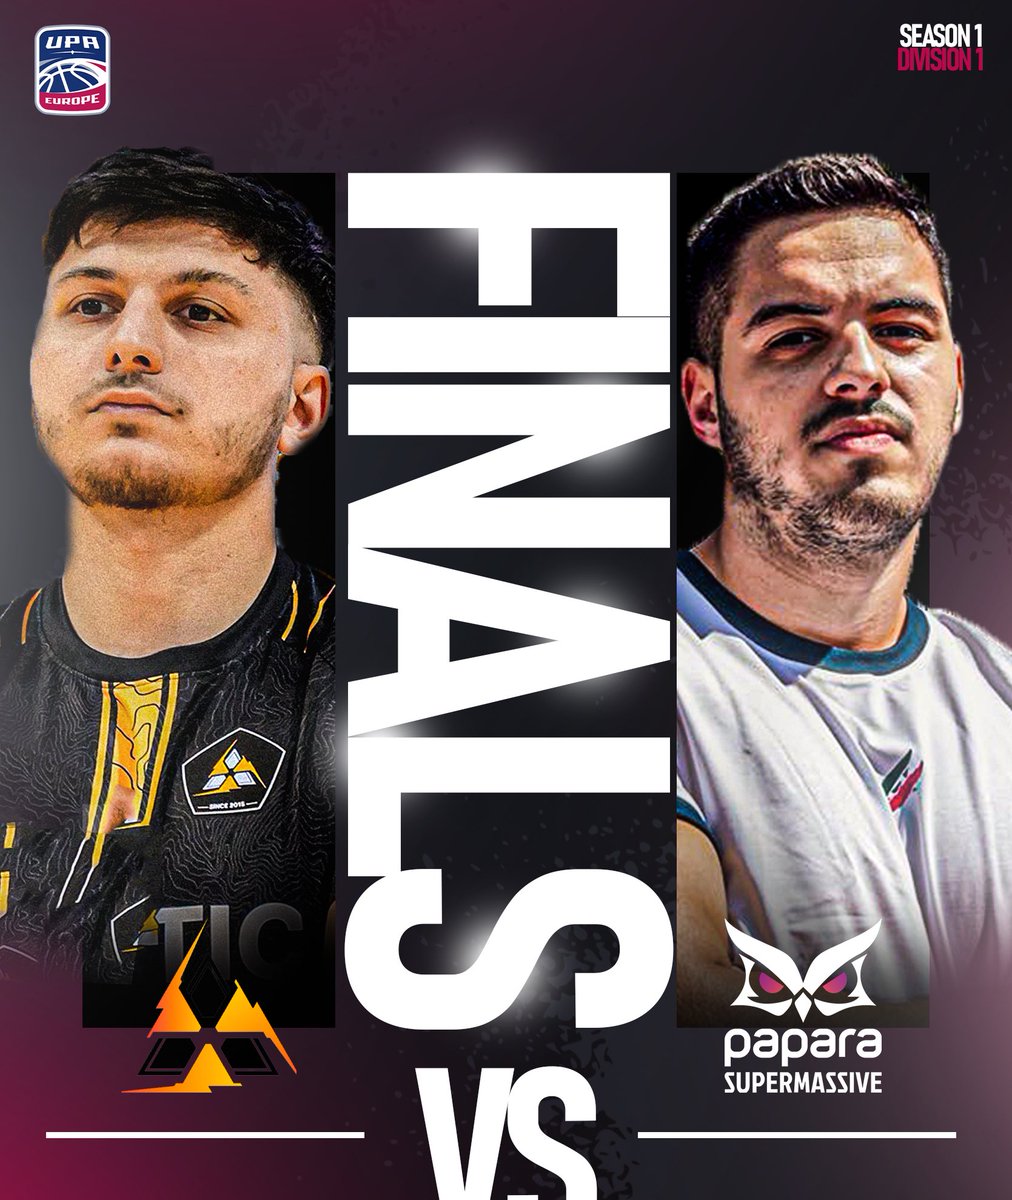 🏆 𝐓𝐇𝐄 𝐅𝐈𝐍𝐀𝐋𝐒 𝐀𝐑𝐄 𝐒𝐄𝐓! 🎟️: @F9HETIC vs @supmassgg Which team will be crowned #UPAEurope’s Season 1 champions? The moment we've all been waiting for, is… 𝐇𝐄𝐑𝐄. #UPAEurope #Division1Finals